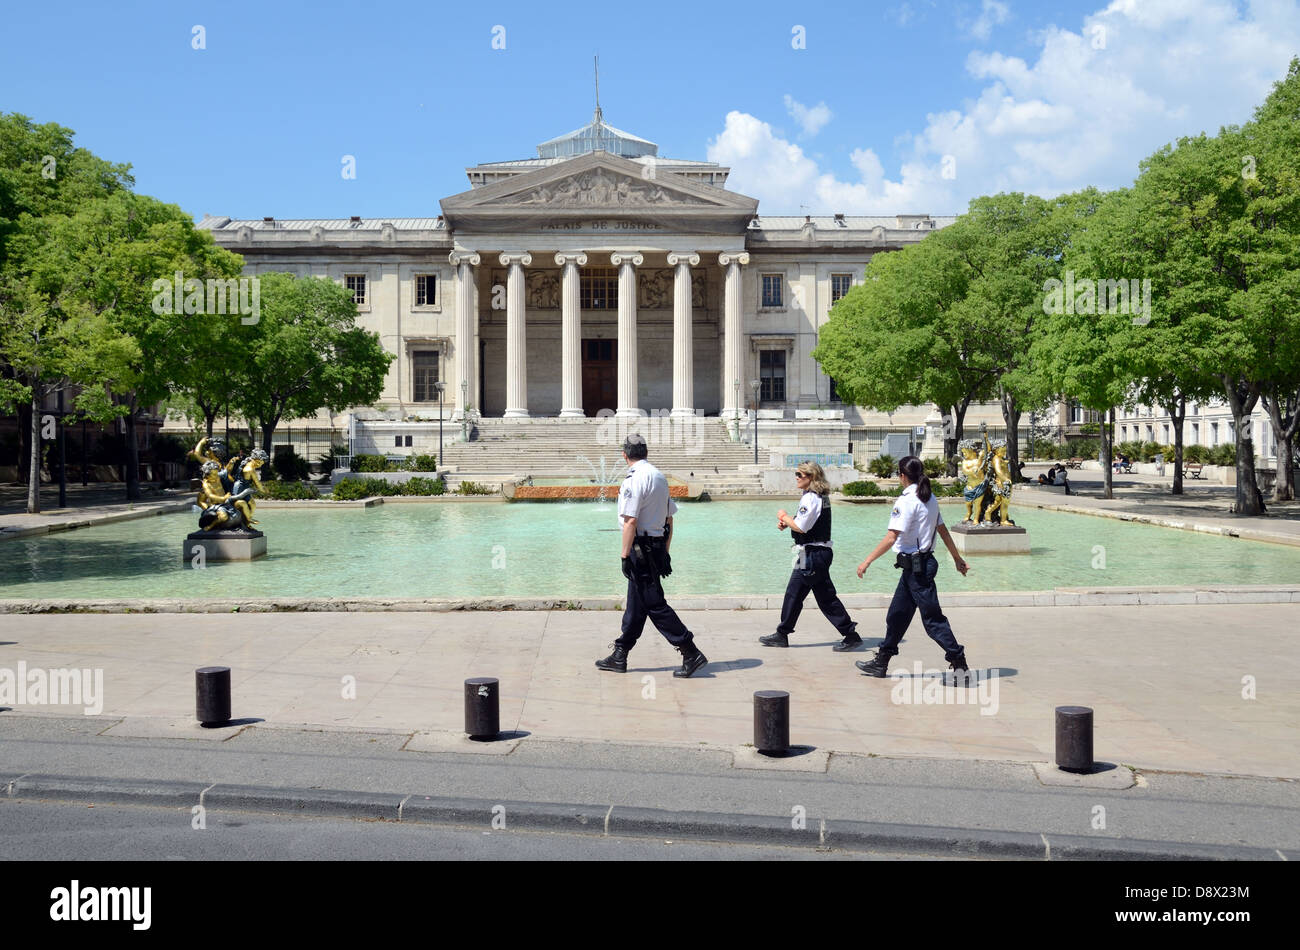 French Police Patrol Outside Palais de Justice, Law Courts or Marseille Courthouse (1856-1862) by Auguste Martin on Place Montyon Marseille France Stock Photo